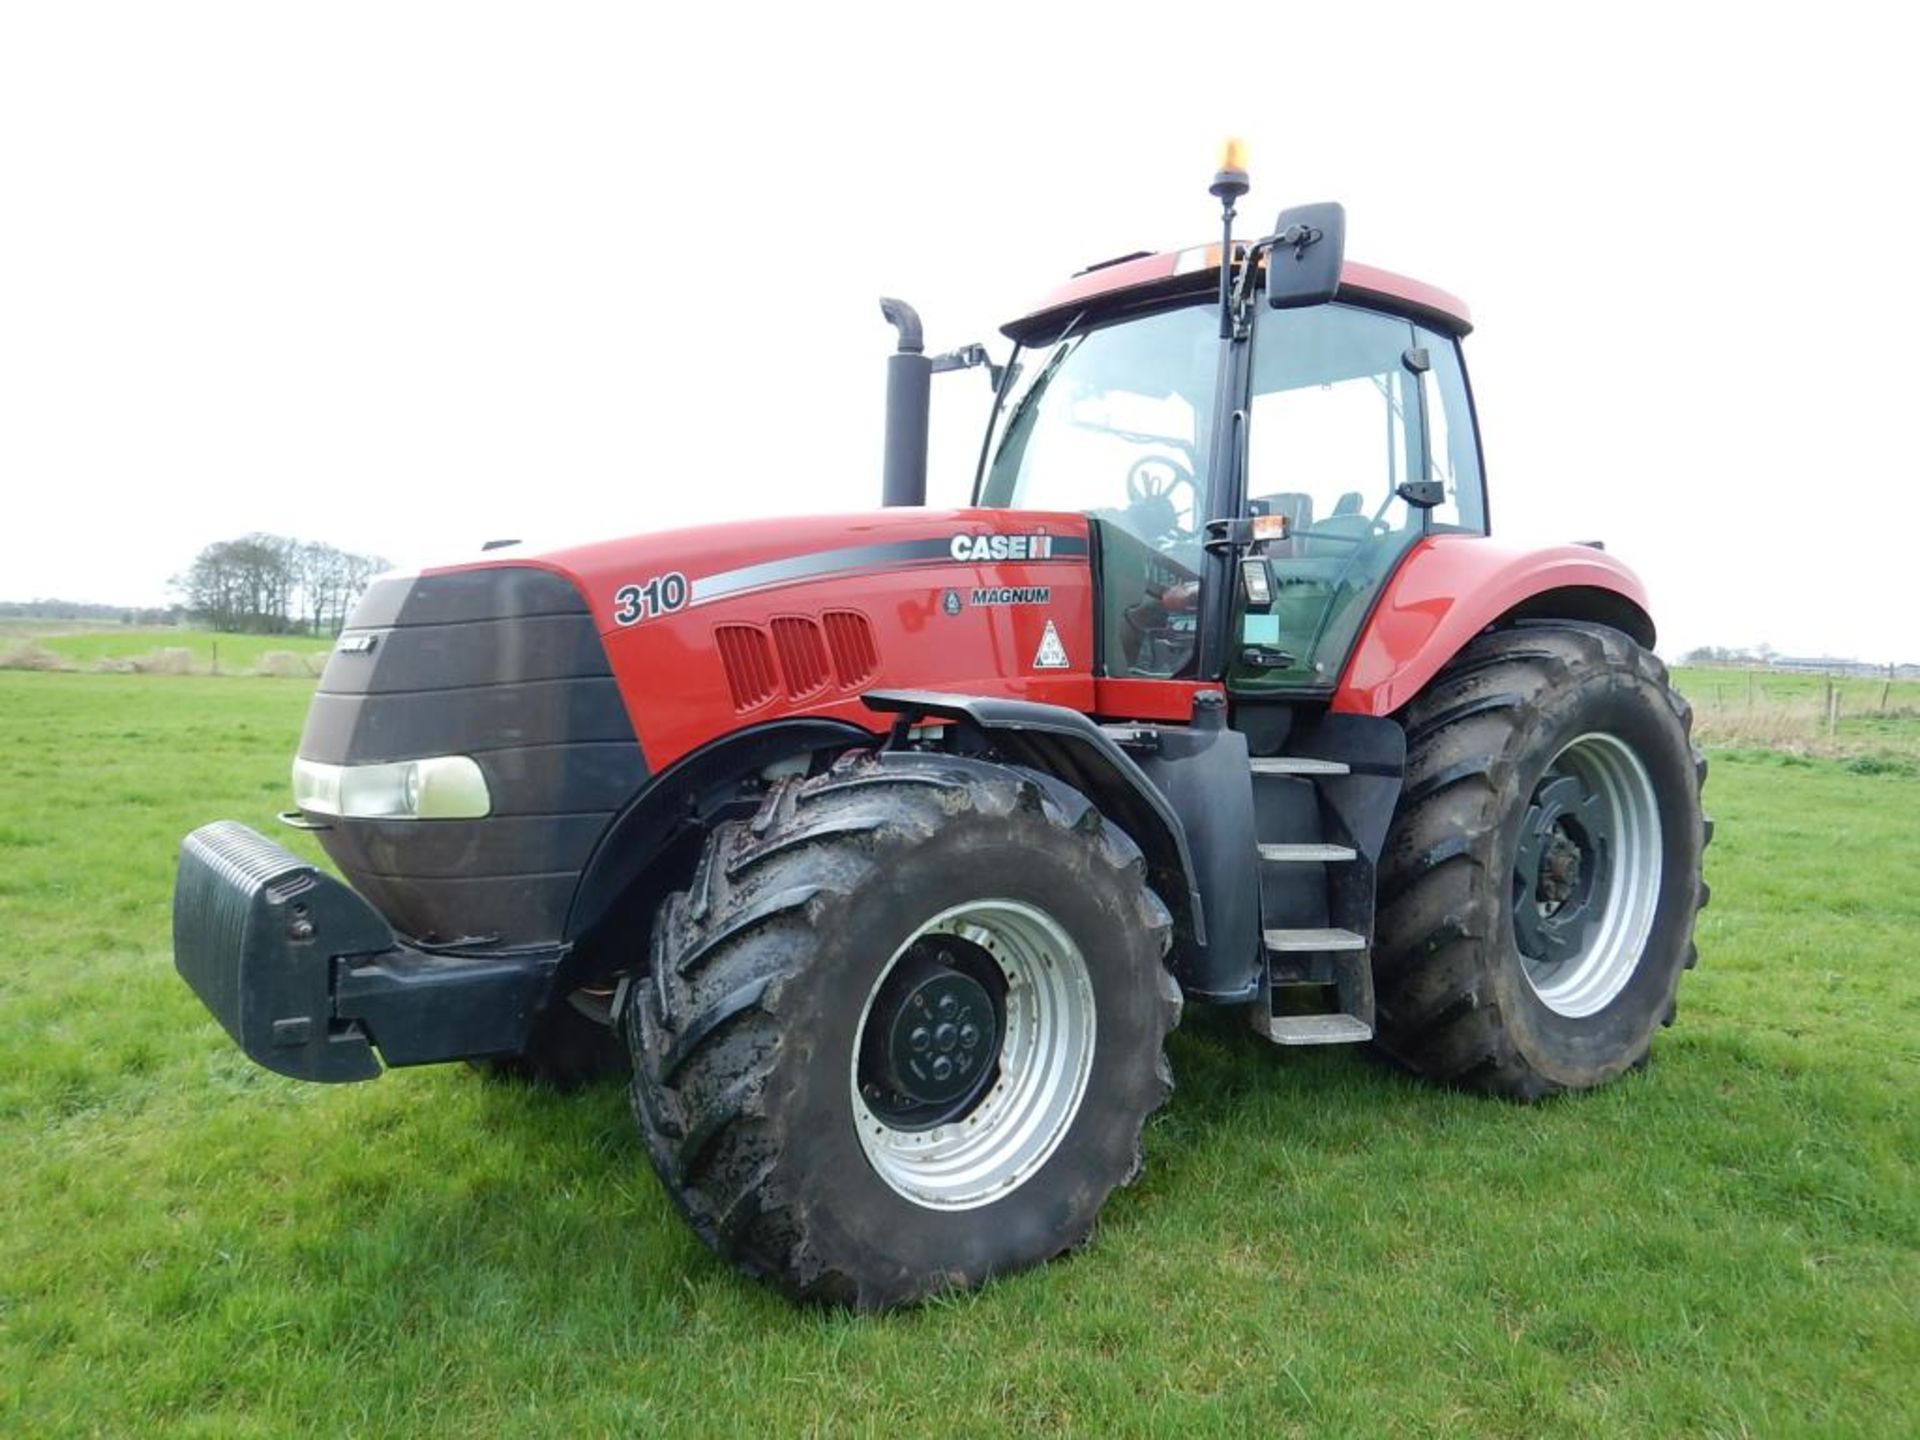 2007 CASE IH 310 Magnum 40kph 4wd TRACTOR Fitted front suspension, front weights, NH guidance